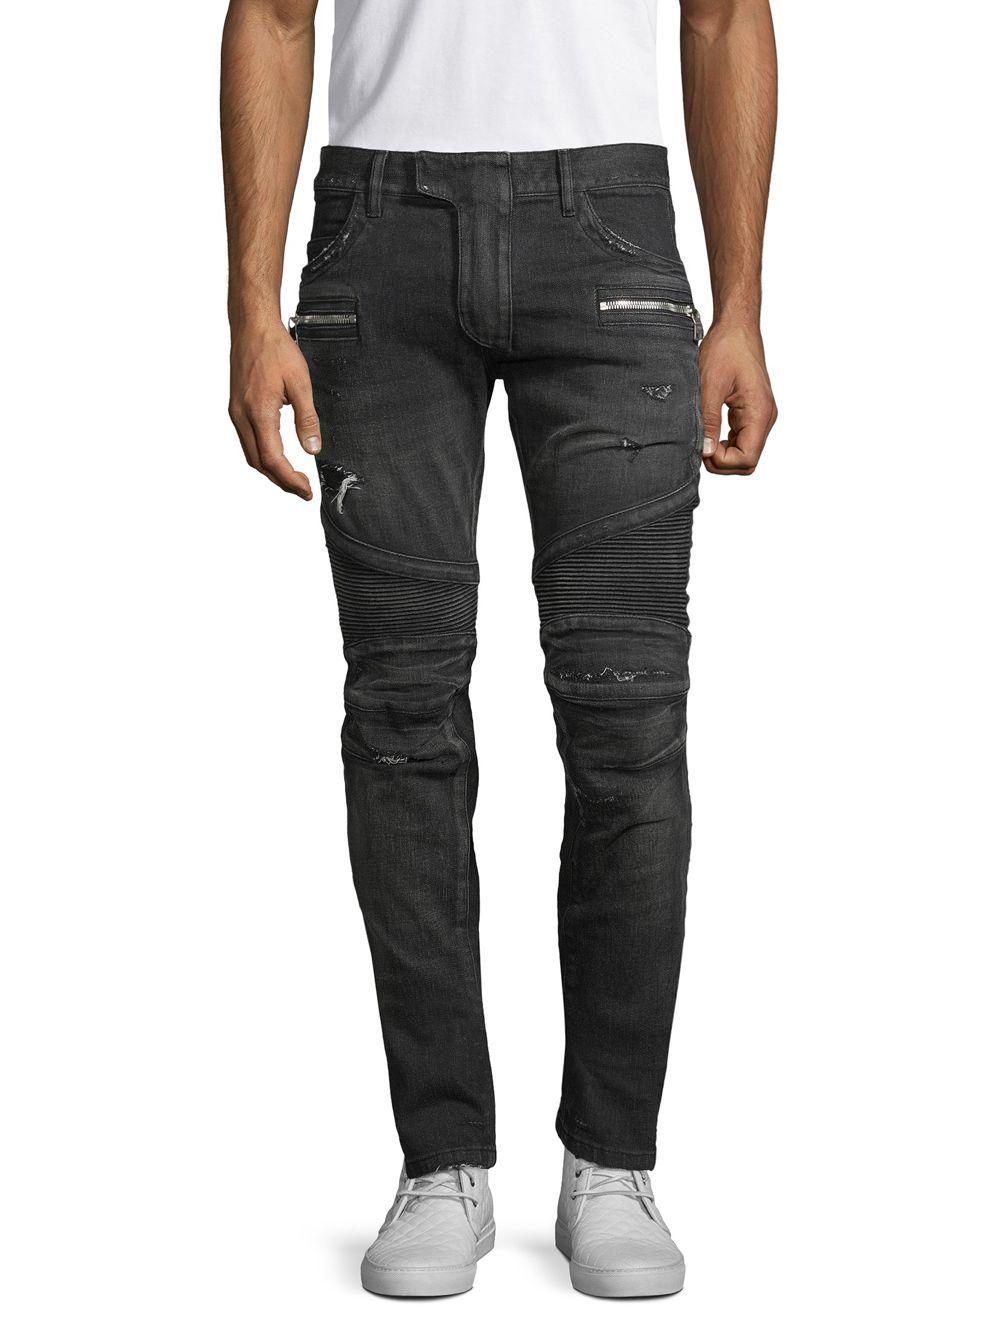 Balmain Distressed Cotton Blend Moto Jeans in Black for